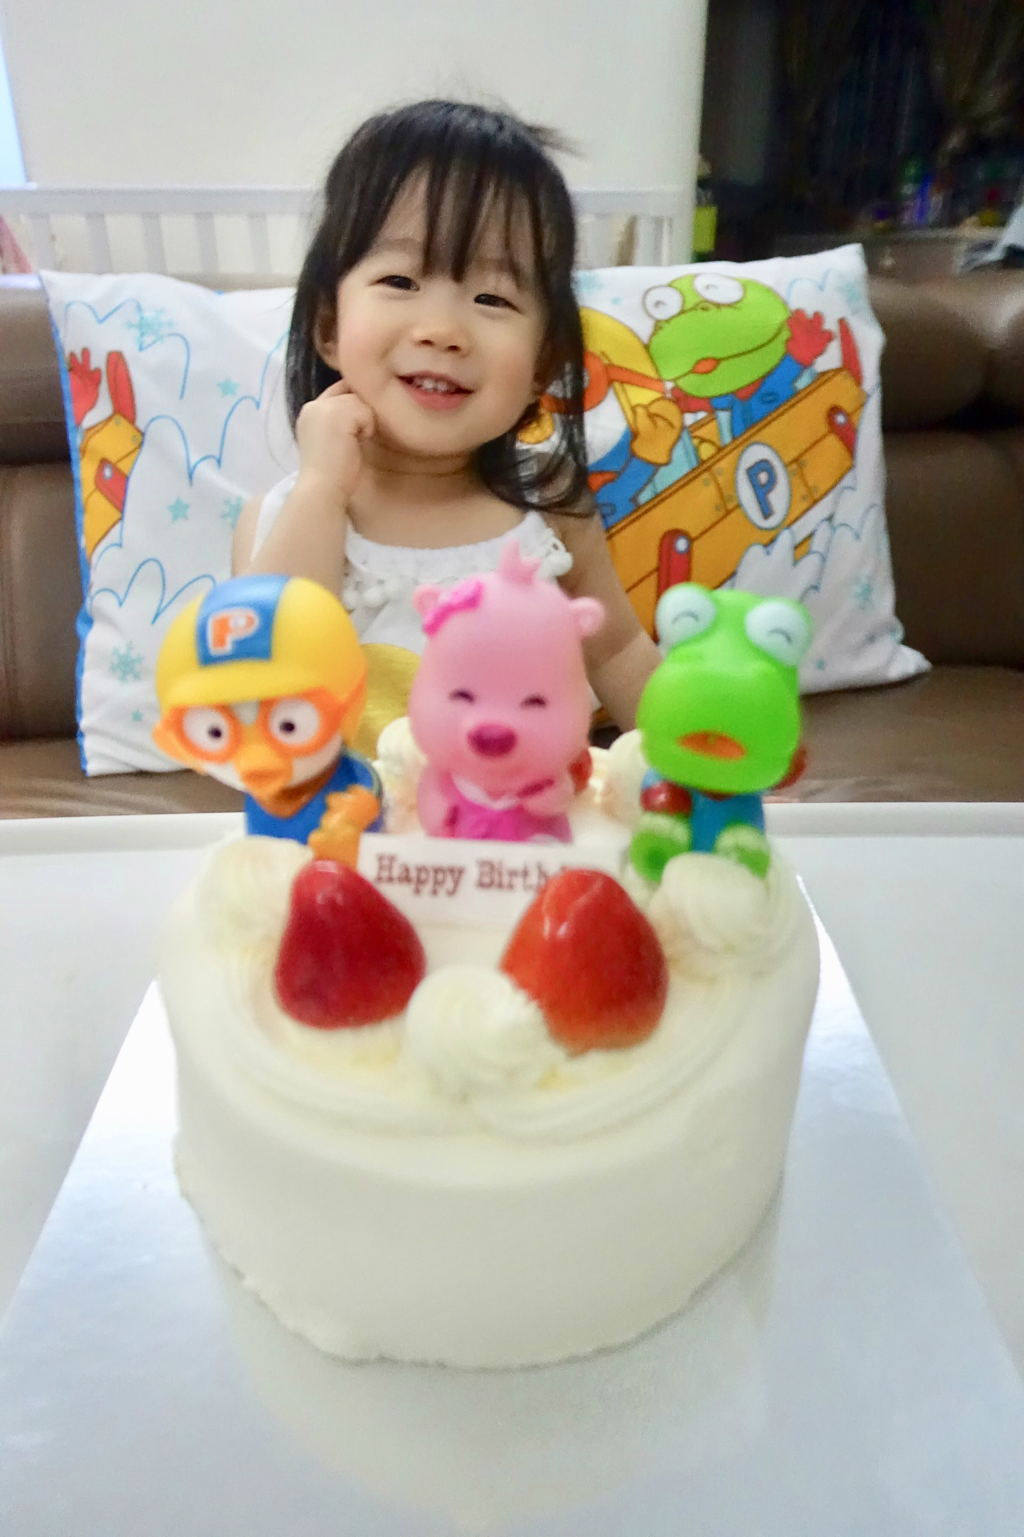 The Pororo bath toys can even double up as birthday cake toppers which is exactly what we did for Mae's 2nd birthday, haha! 